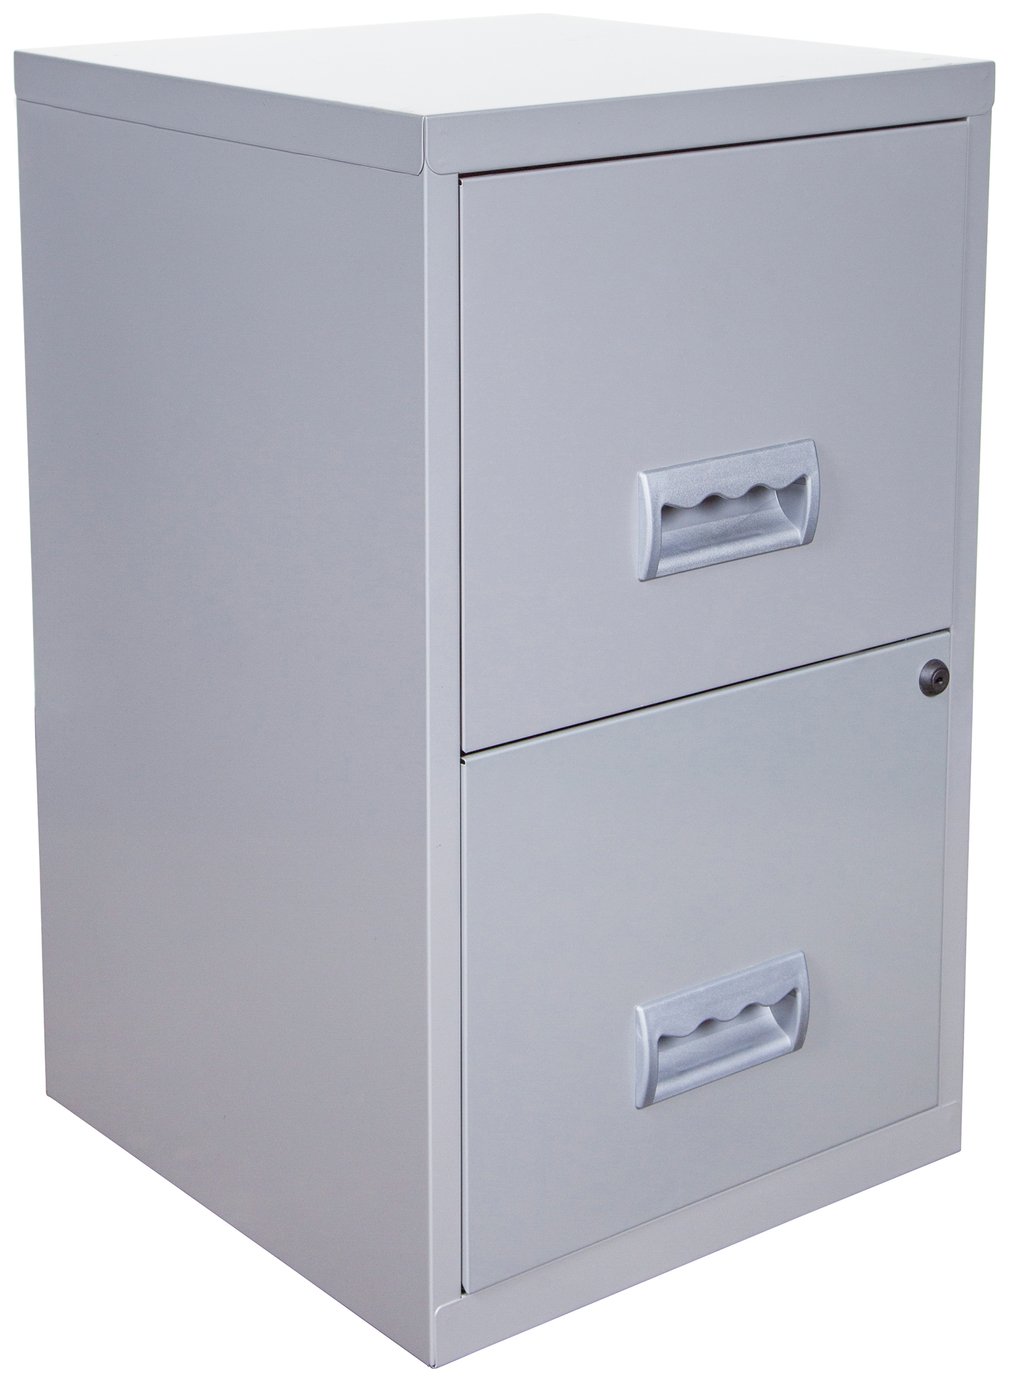 Pierre Henry 2 Drawer Filing Cabinet - Silver